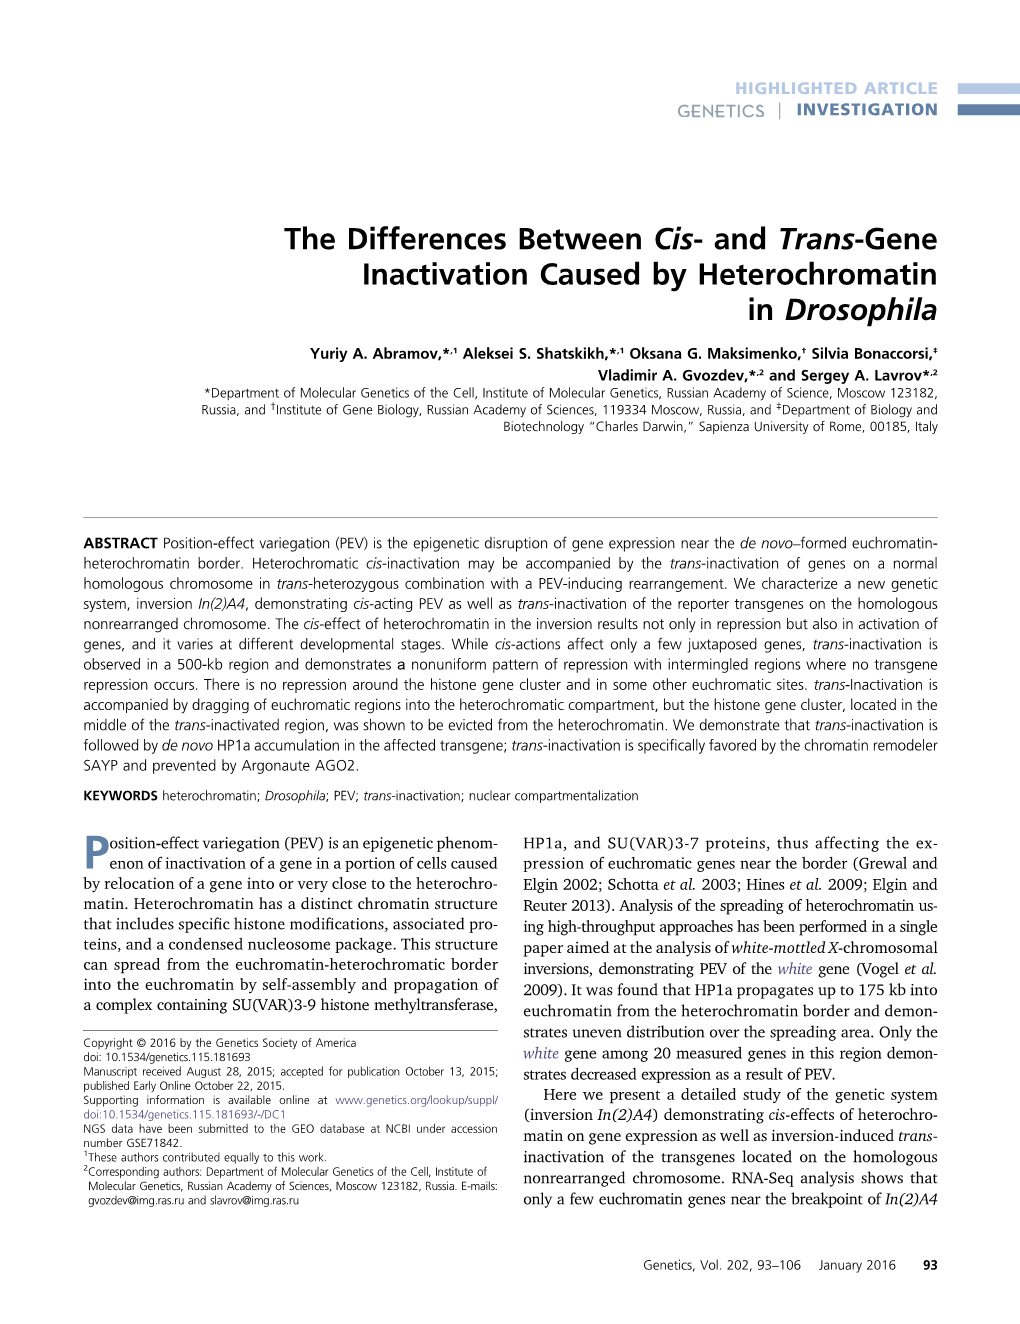 The Differences Between Cis- and Trans-Gene Inactivation Caused by Heterochromatin in Drosophila